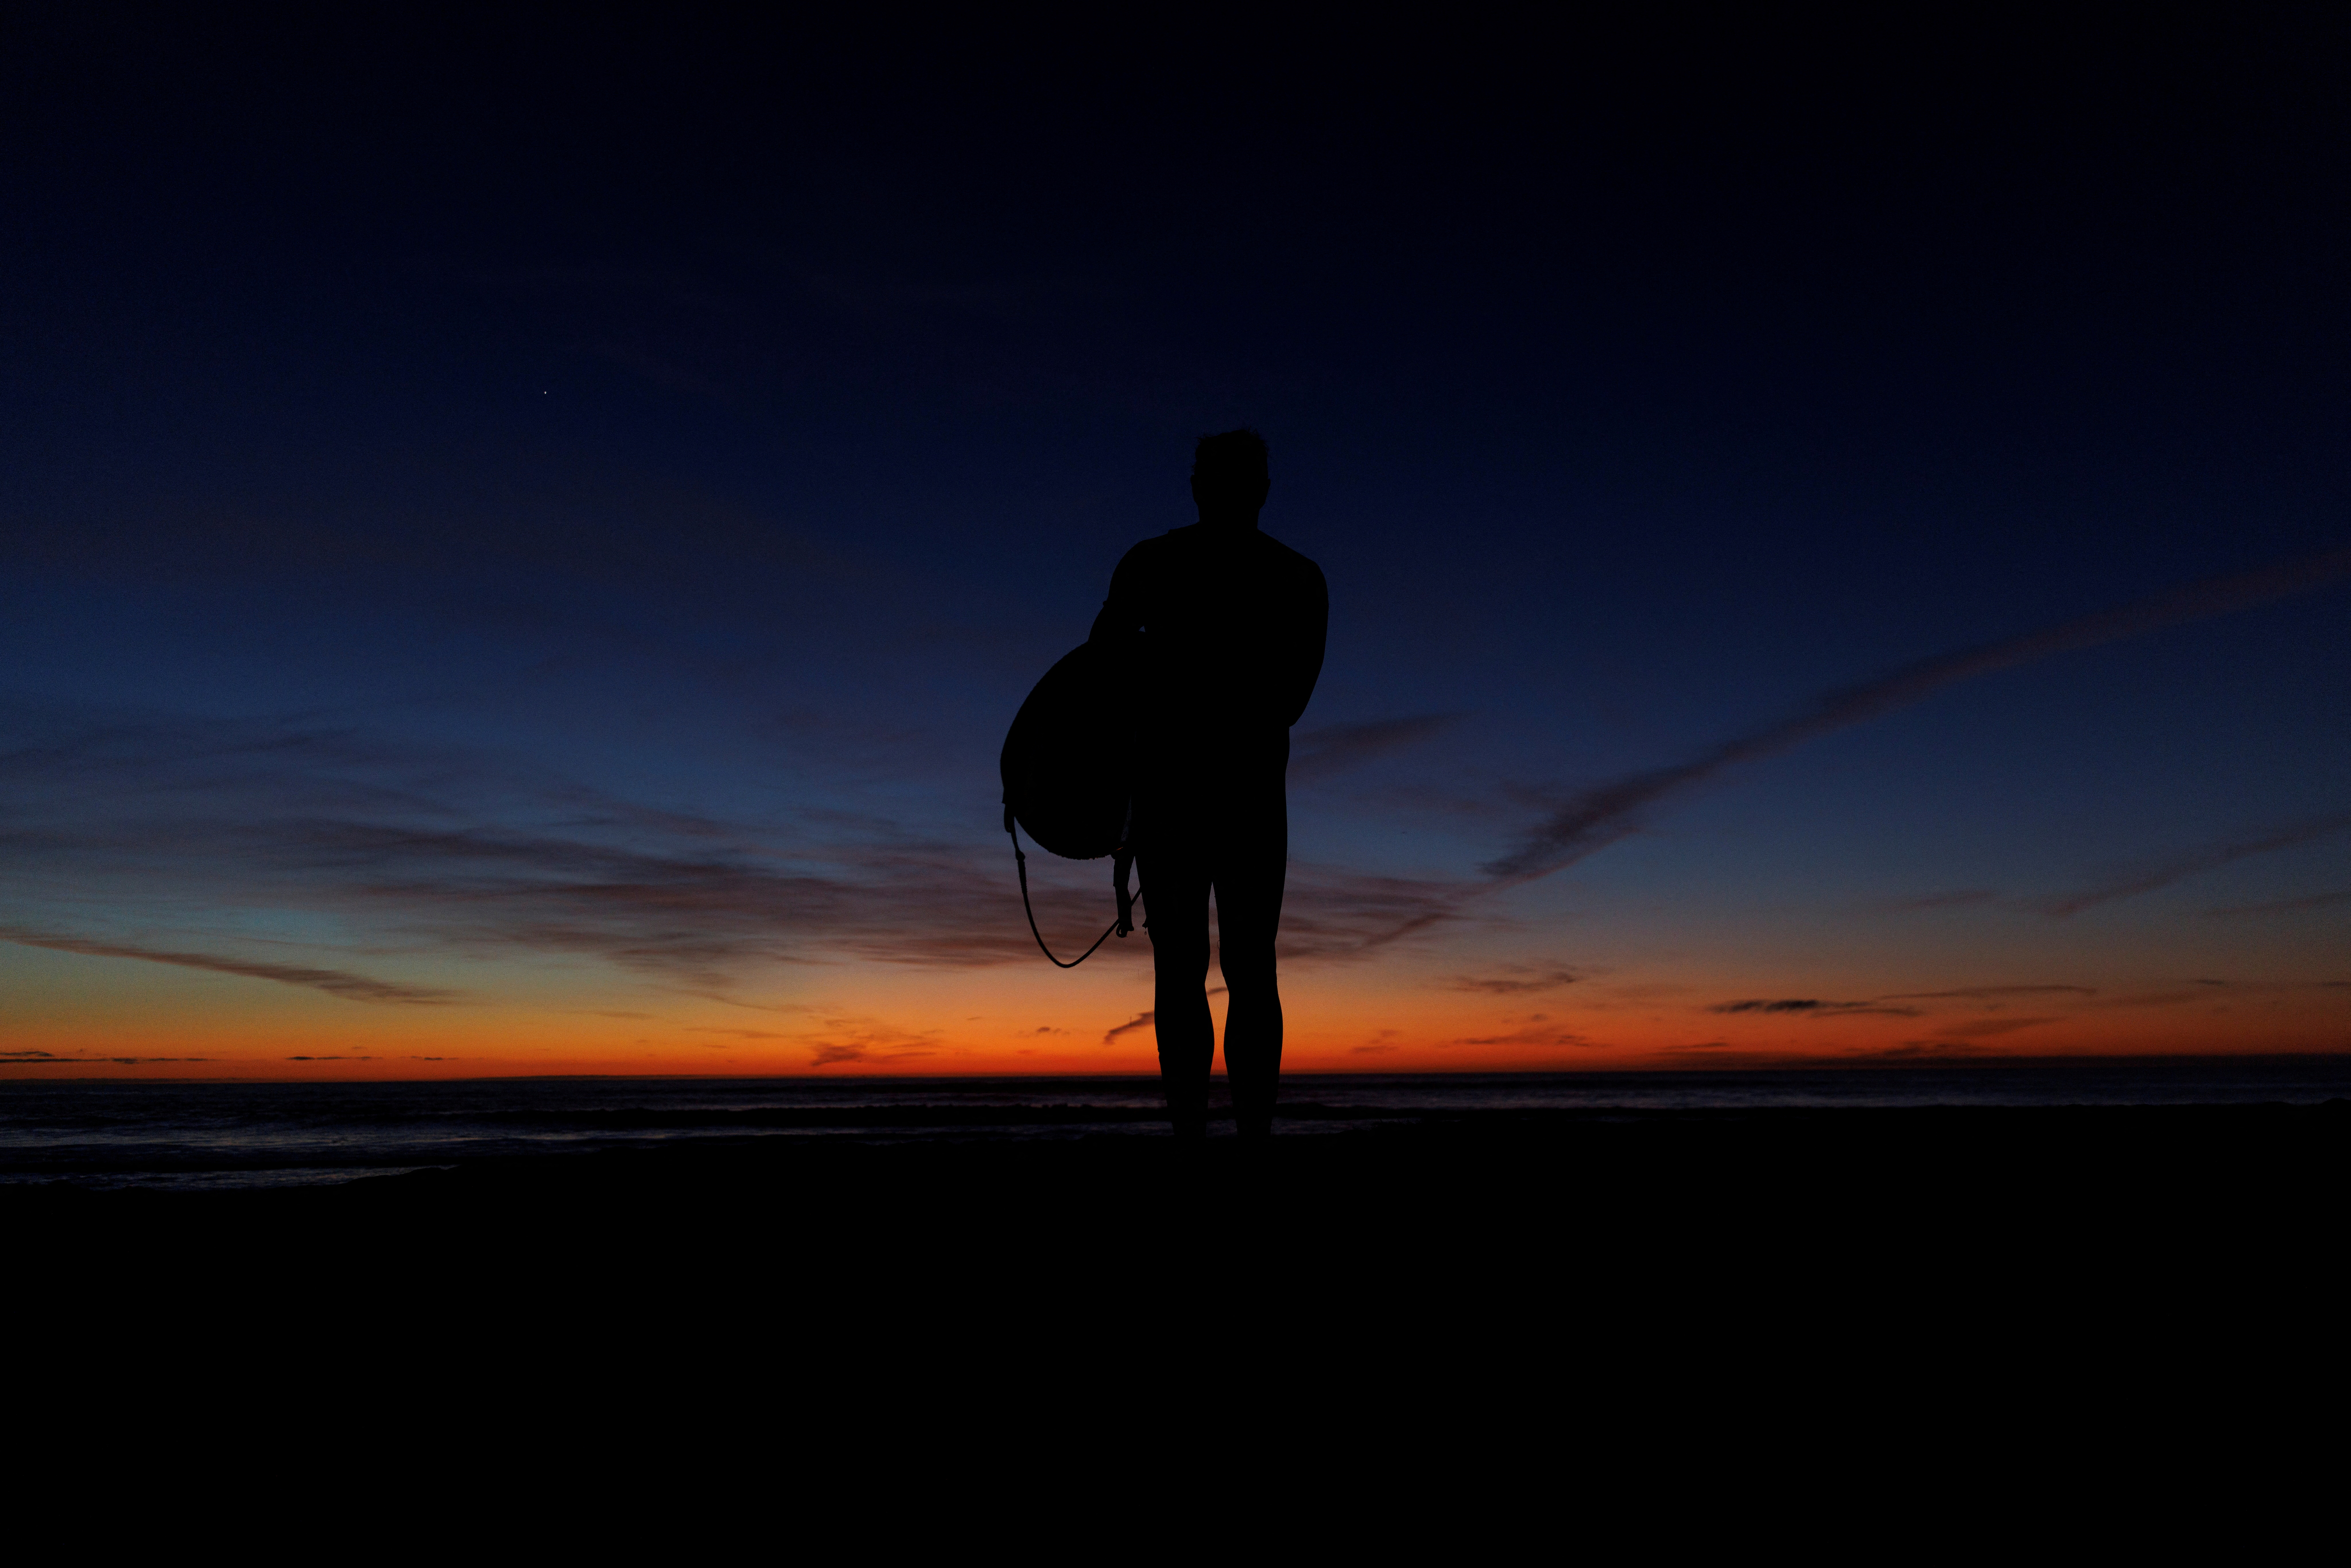 A surfer looks out at the ocean and evening sky after surfing in Encinitas, California